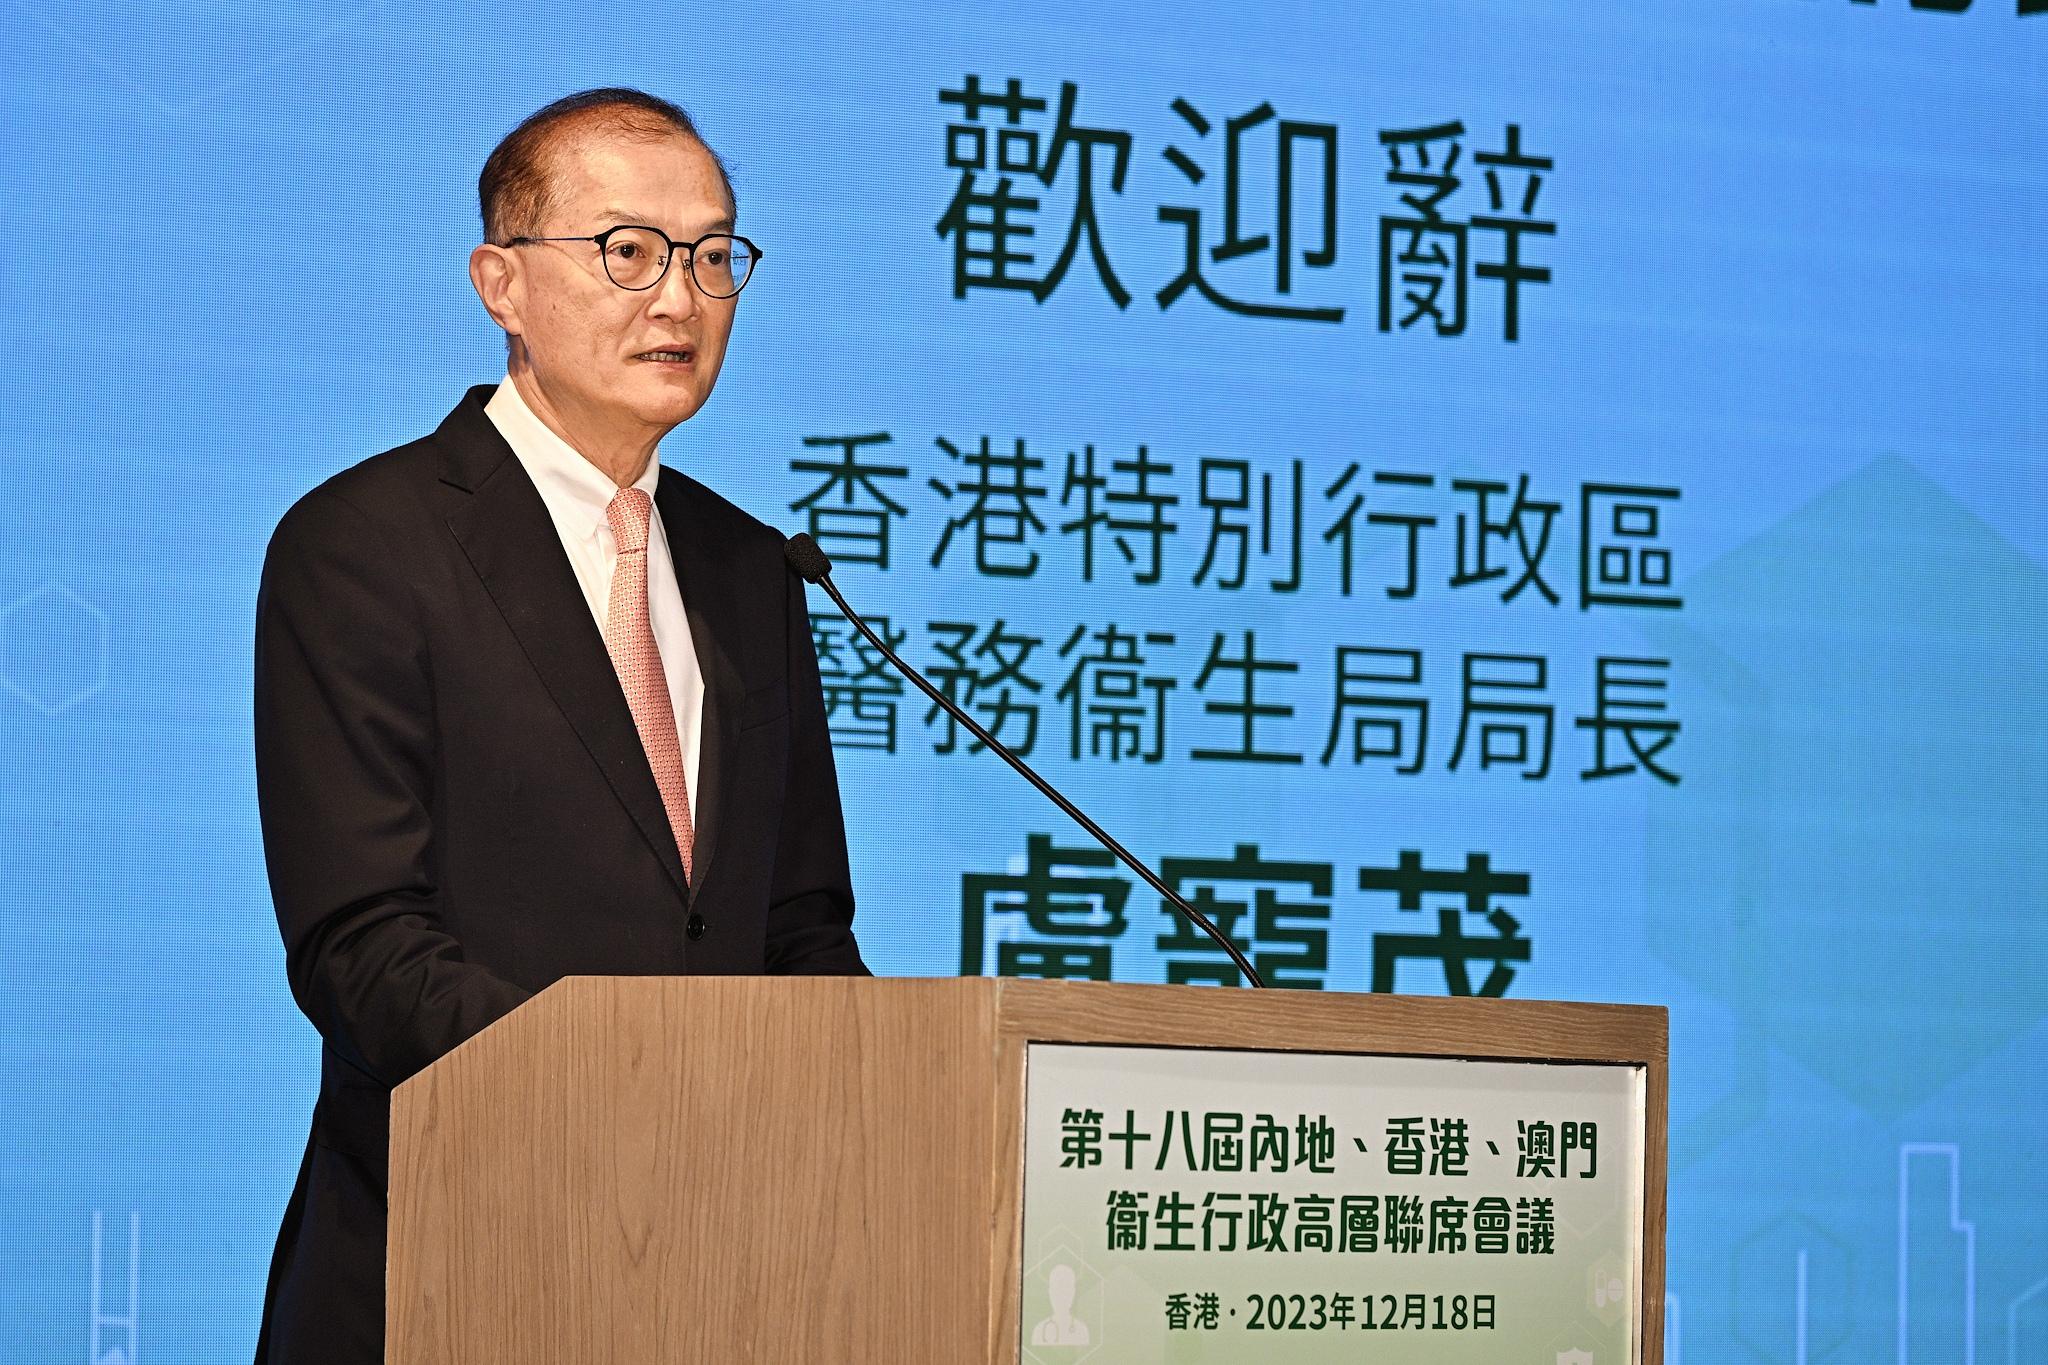 The Secretary for Health, Professor Lo Chung-mau, delivers a speech at the 18th Joint Meeting of the Senior Health Officials of the Mainland, Hong Kong and Macao this morning (December 18).